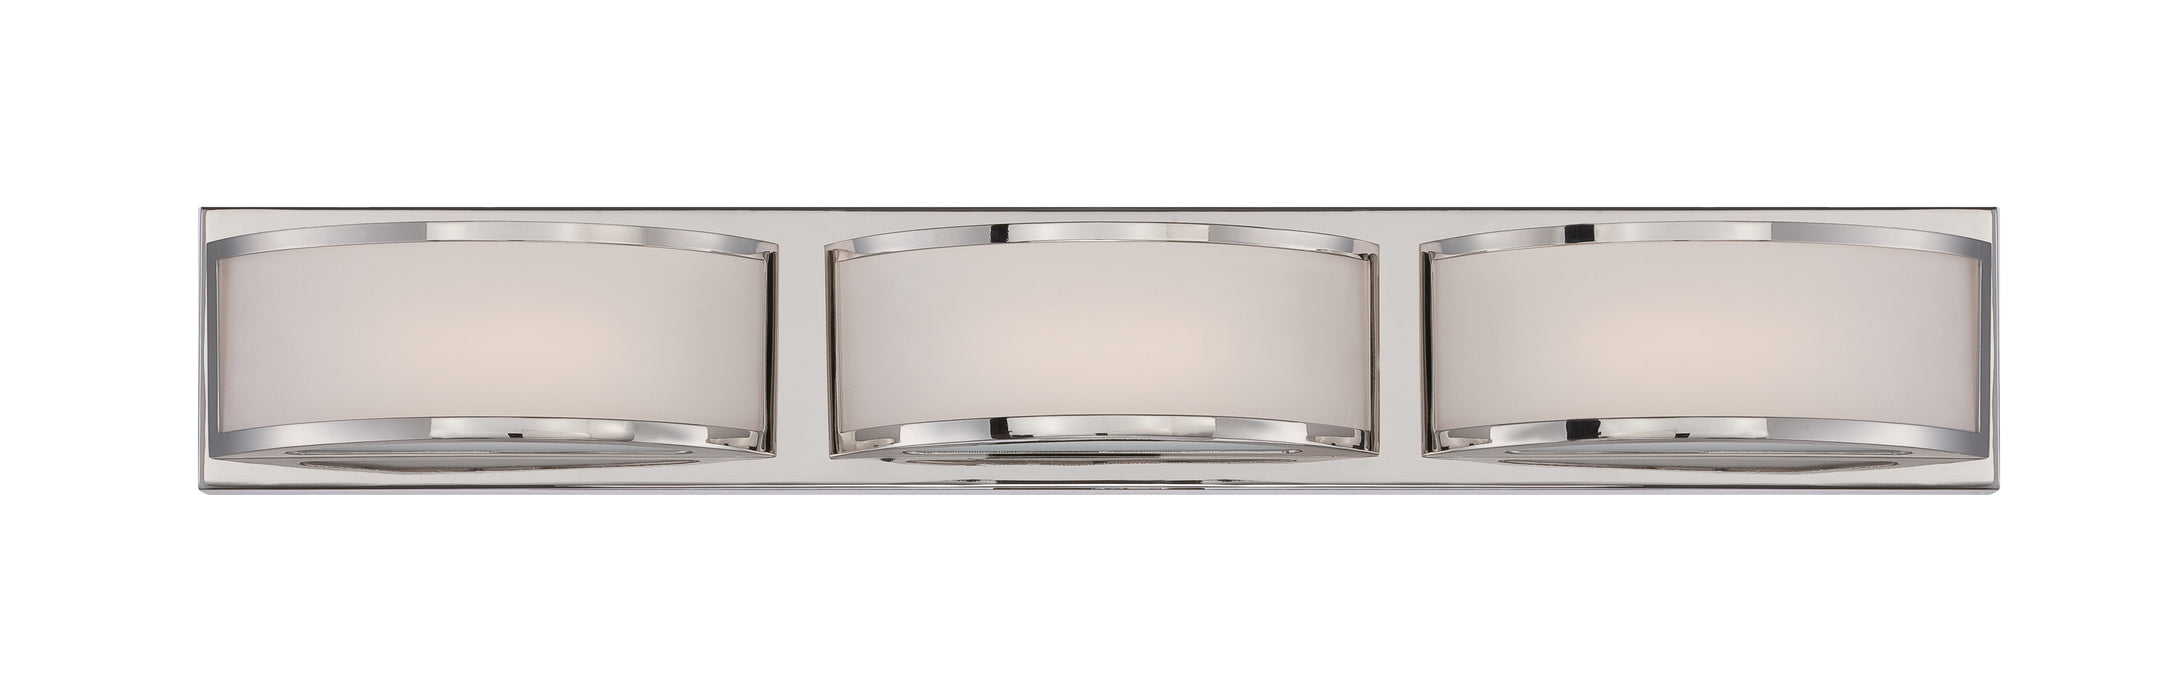 SATCO/NUVO Mercer 3 LED Wall Sconce (62-313)